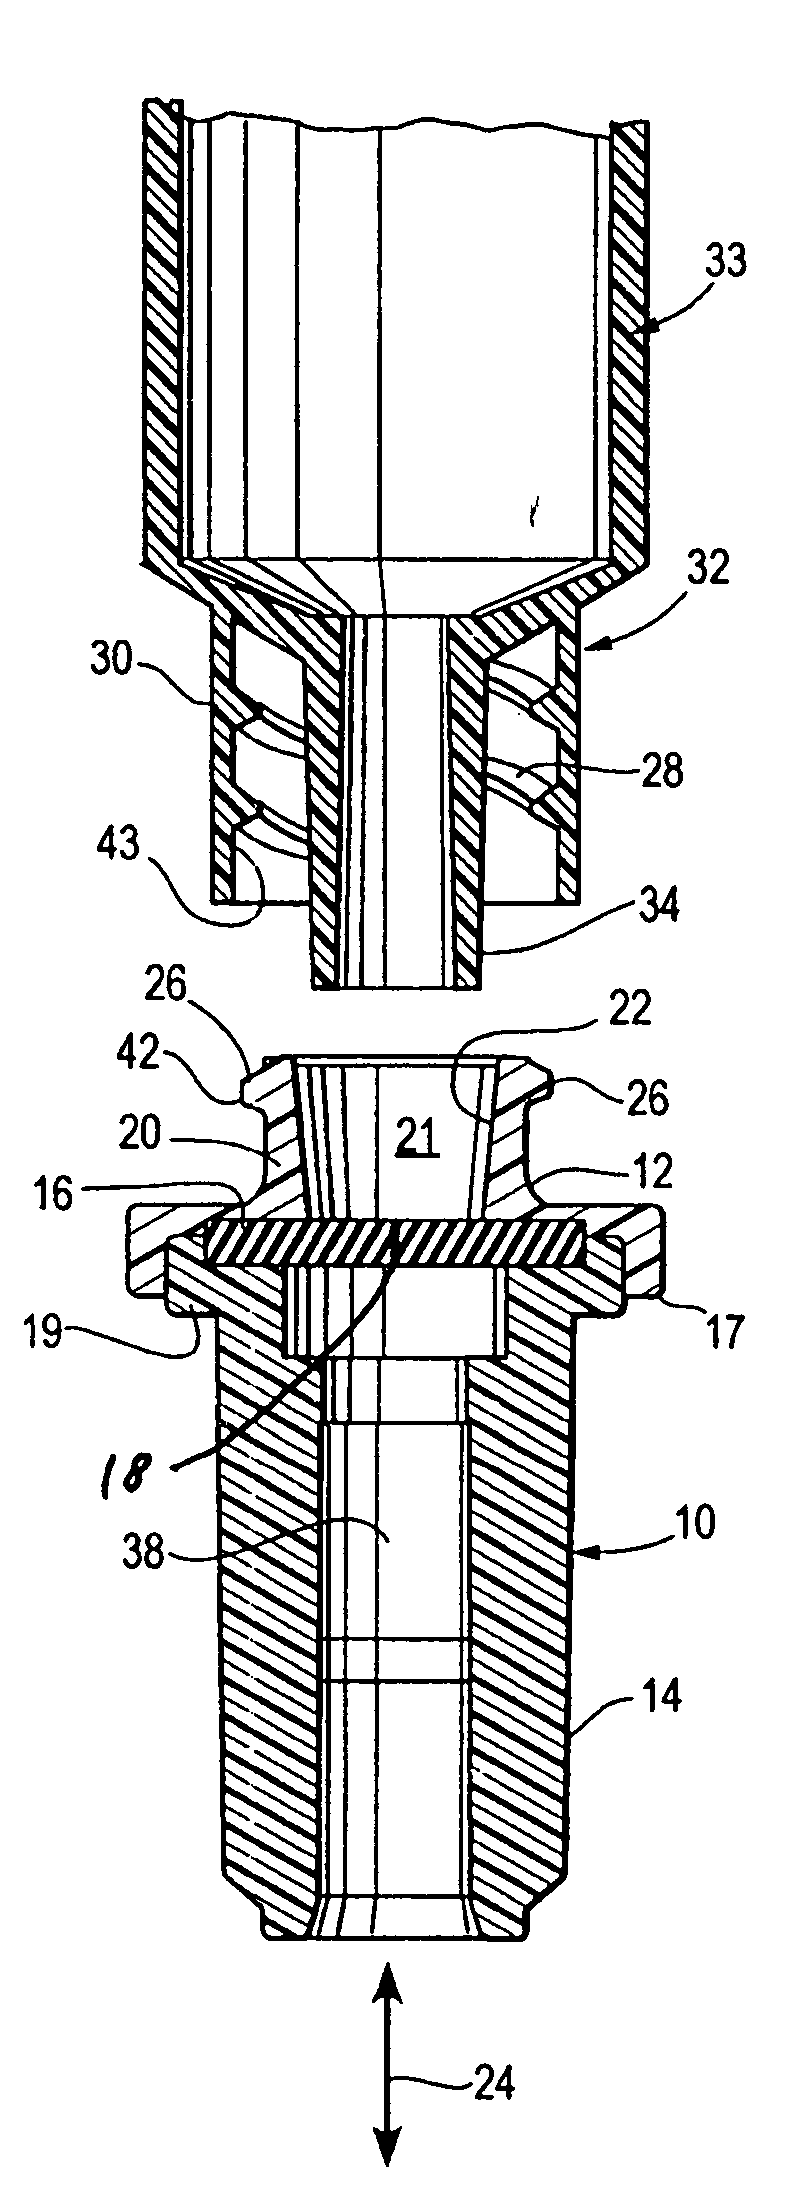 Fluid flow connector permitting forceful lateral separation